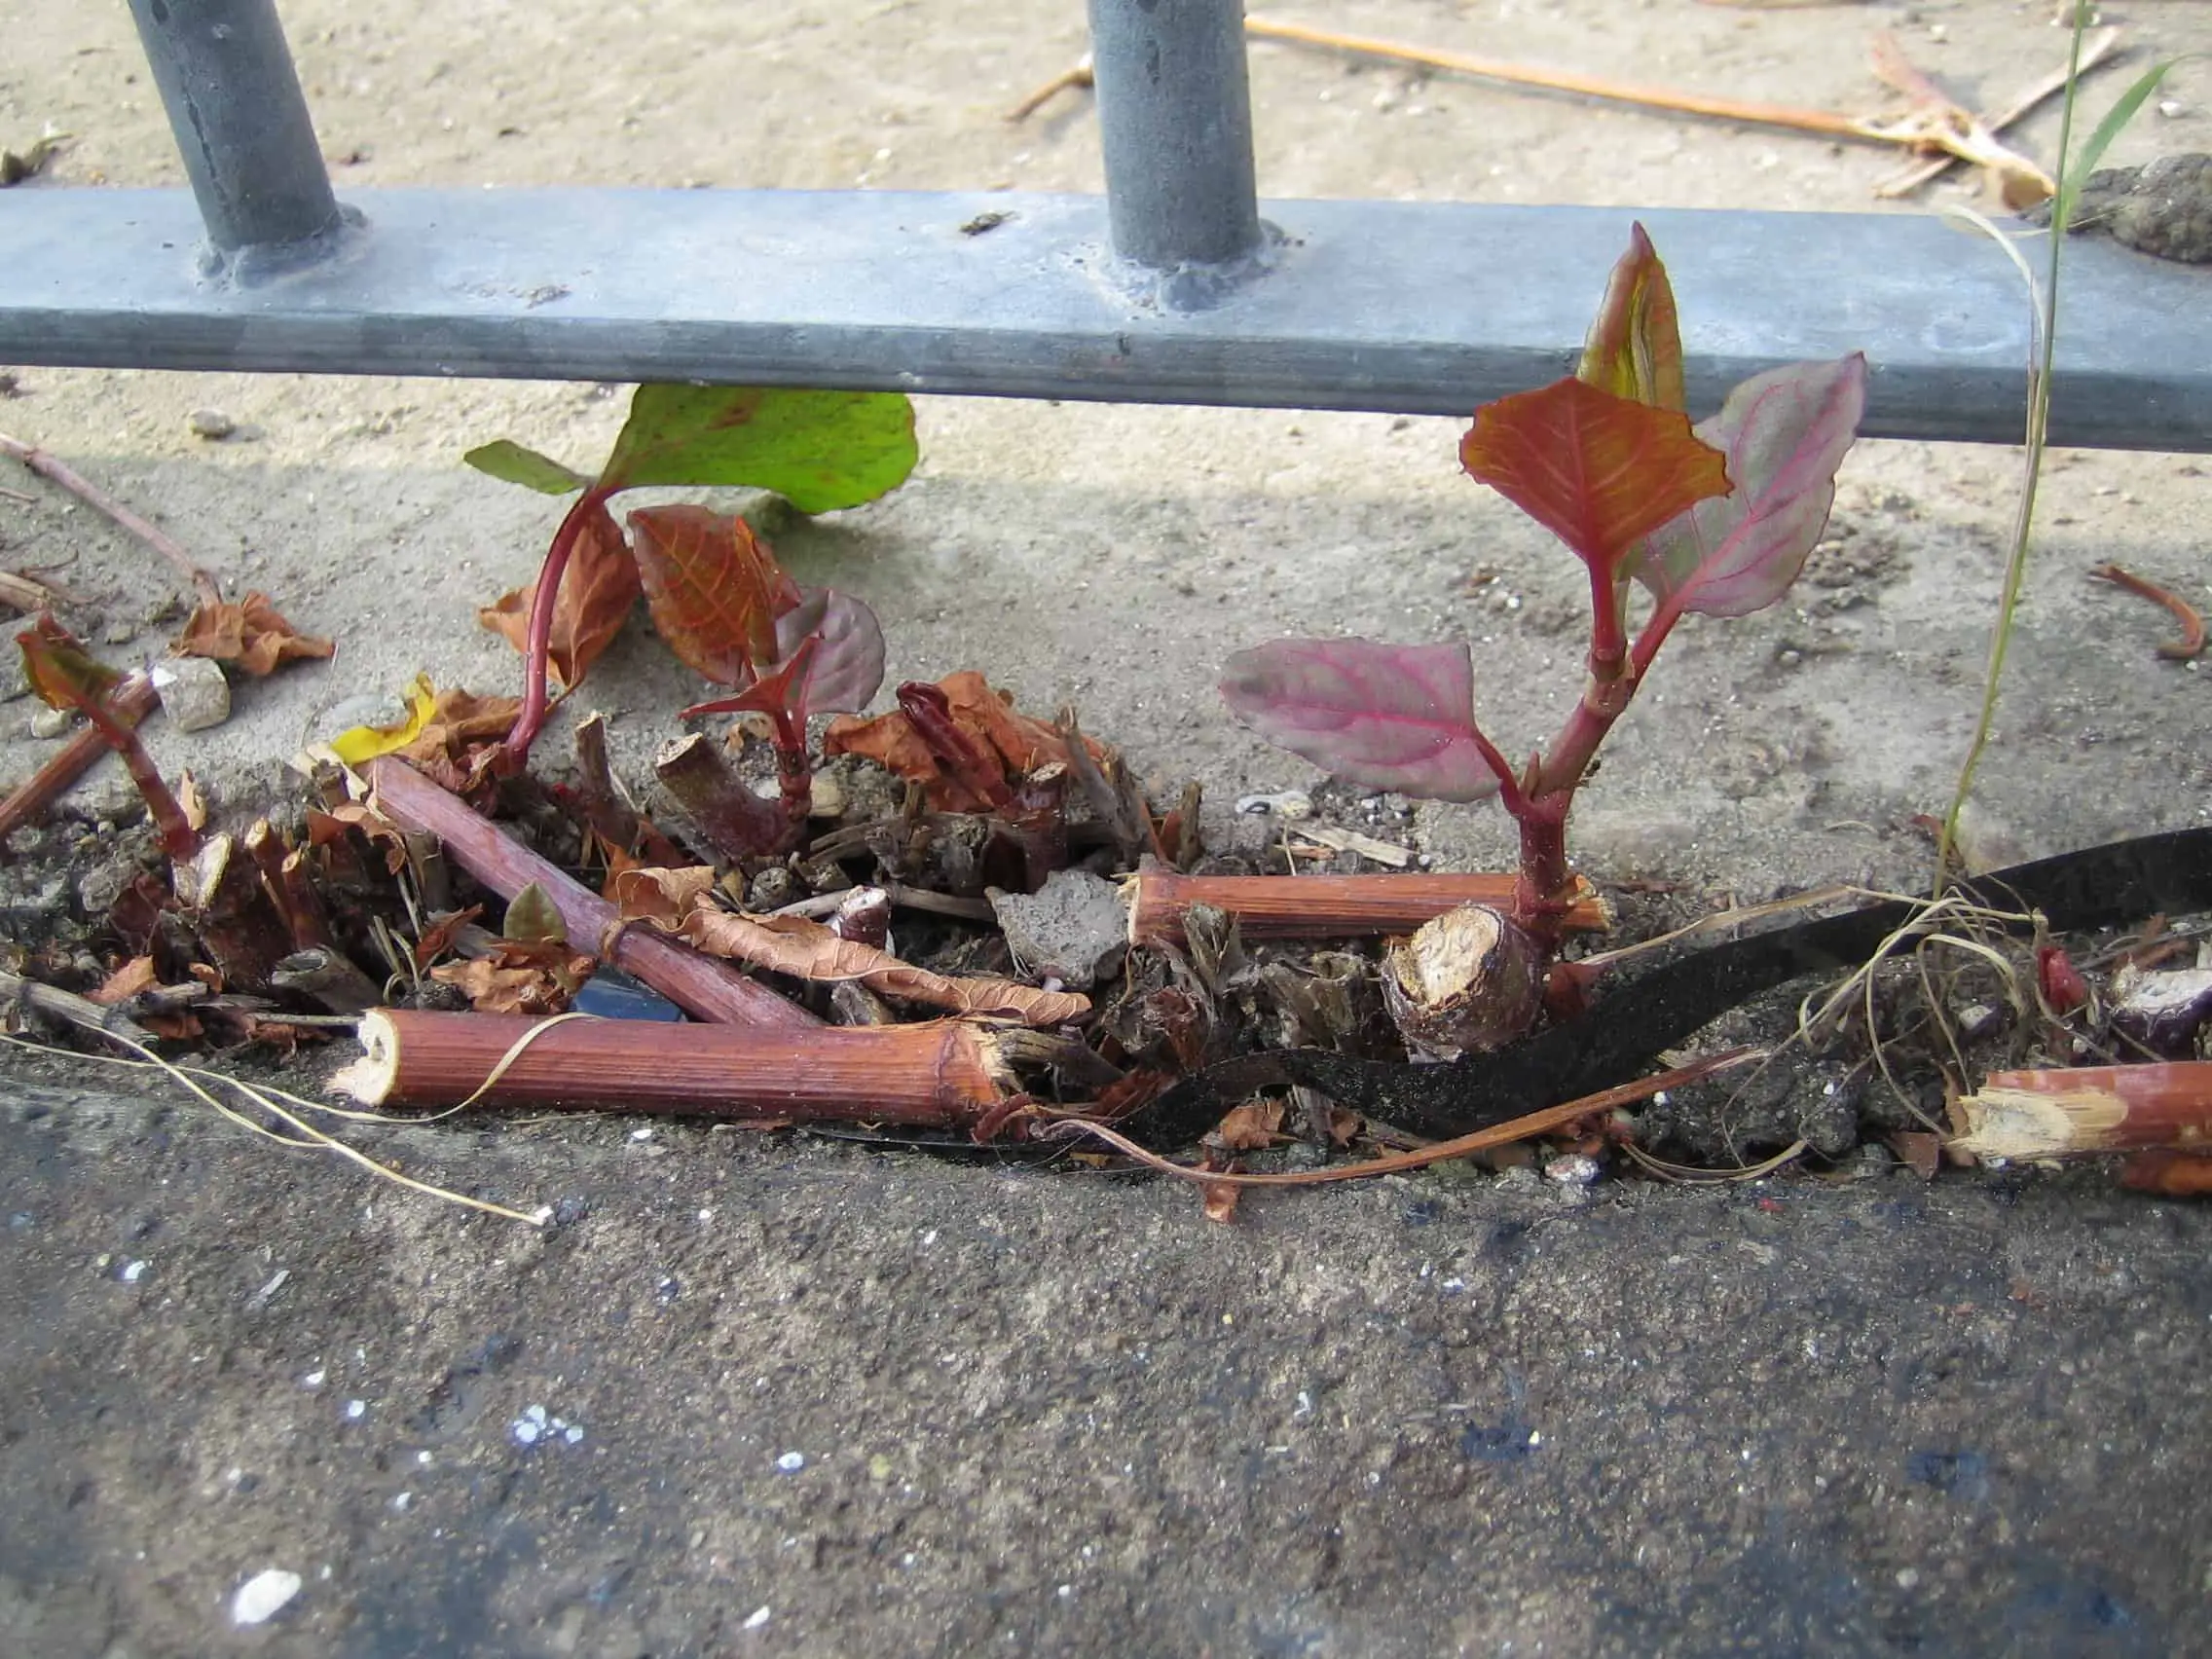 Japanese knotweed growing the cracks within concrete